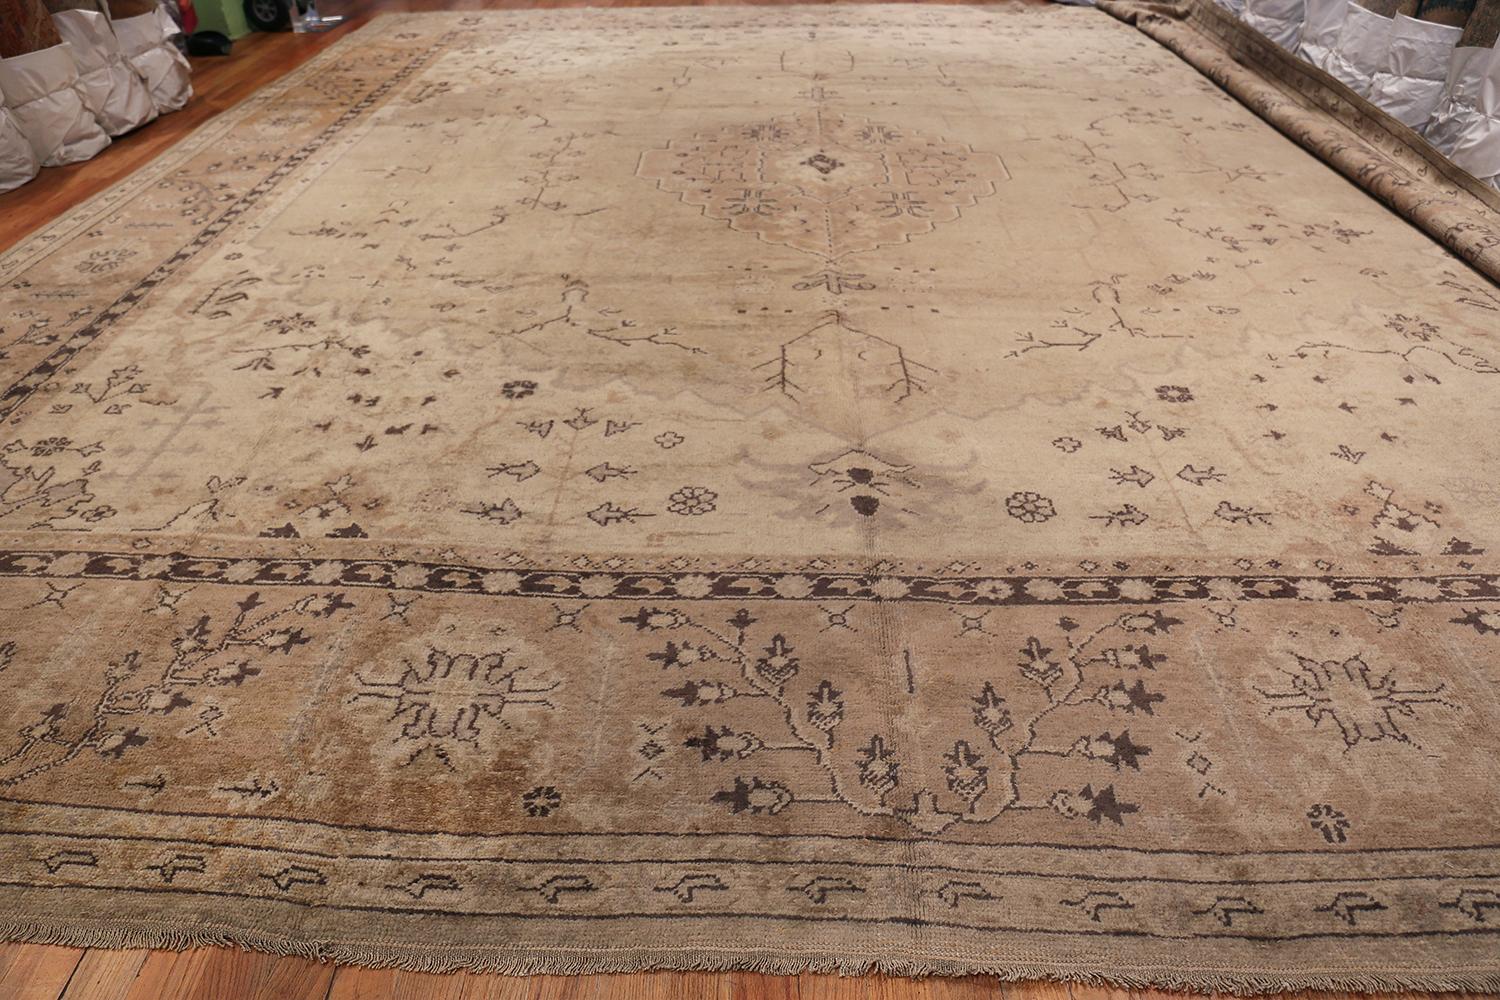 Antique decorative and Quite Large Turkish Ghiordes Rug, Origin: Turkey, Woven Circa: 1900 – Highly reminiscent of the carpets from nearby Oushak, this lovely antique Ghiordes rug has an elegant medallion design with corner pieces surrounding